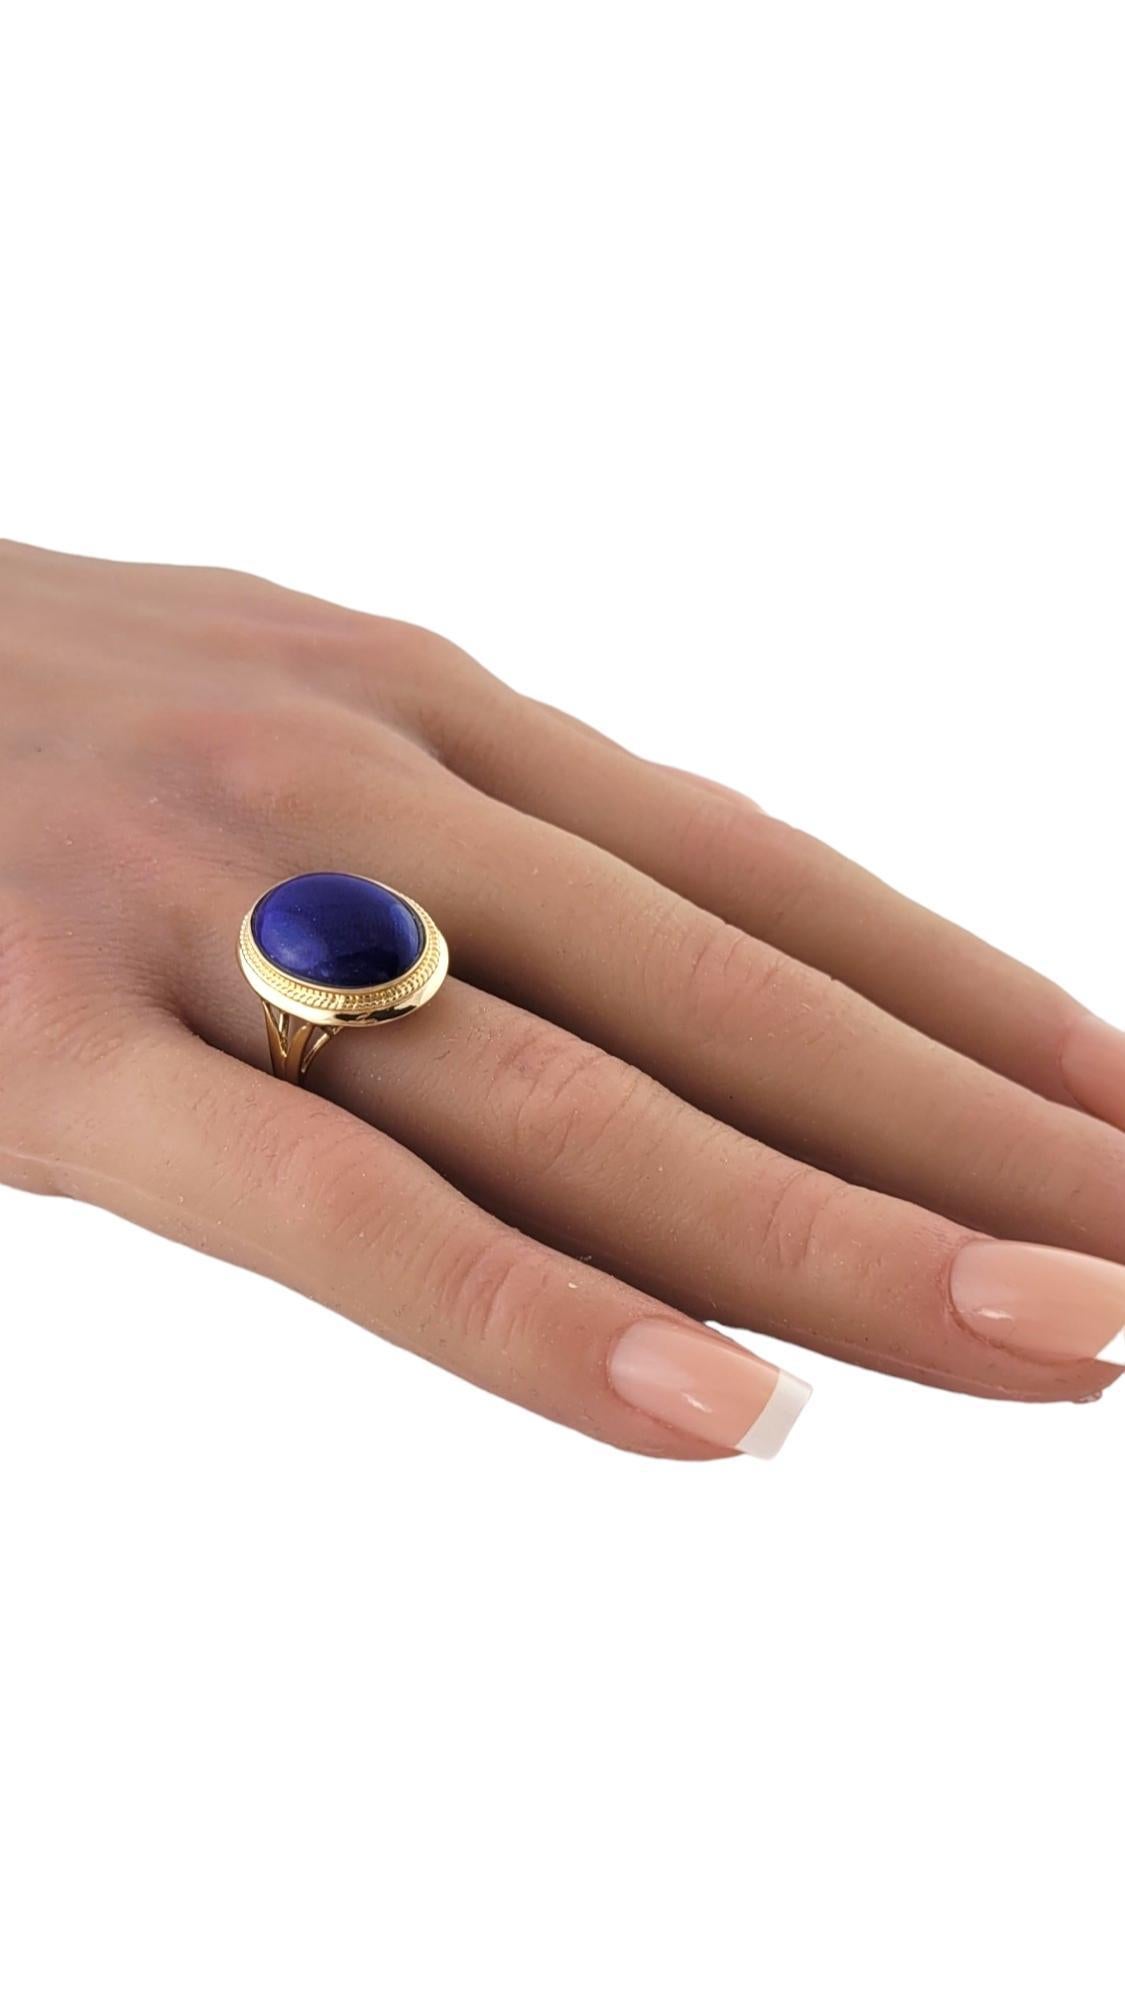 14K Yellow Gold Oval Blue Lapis Ring Size 7.25 #17376 2